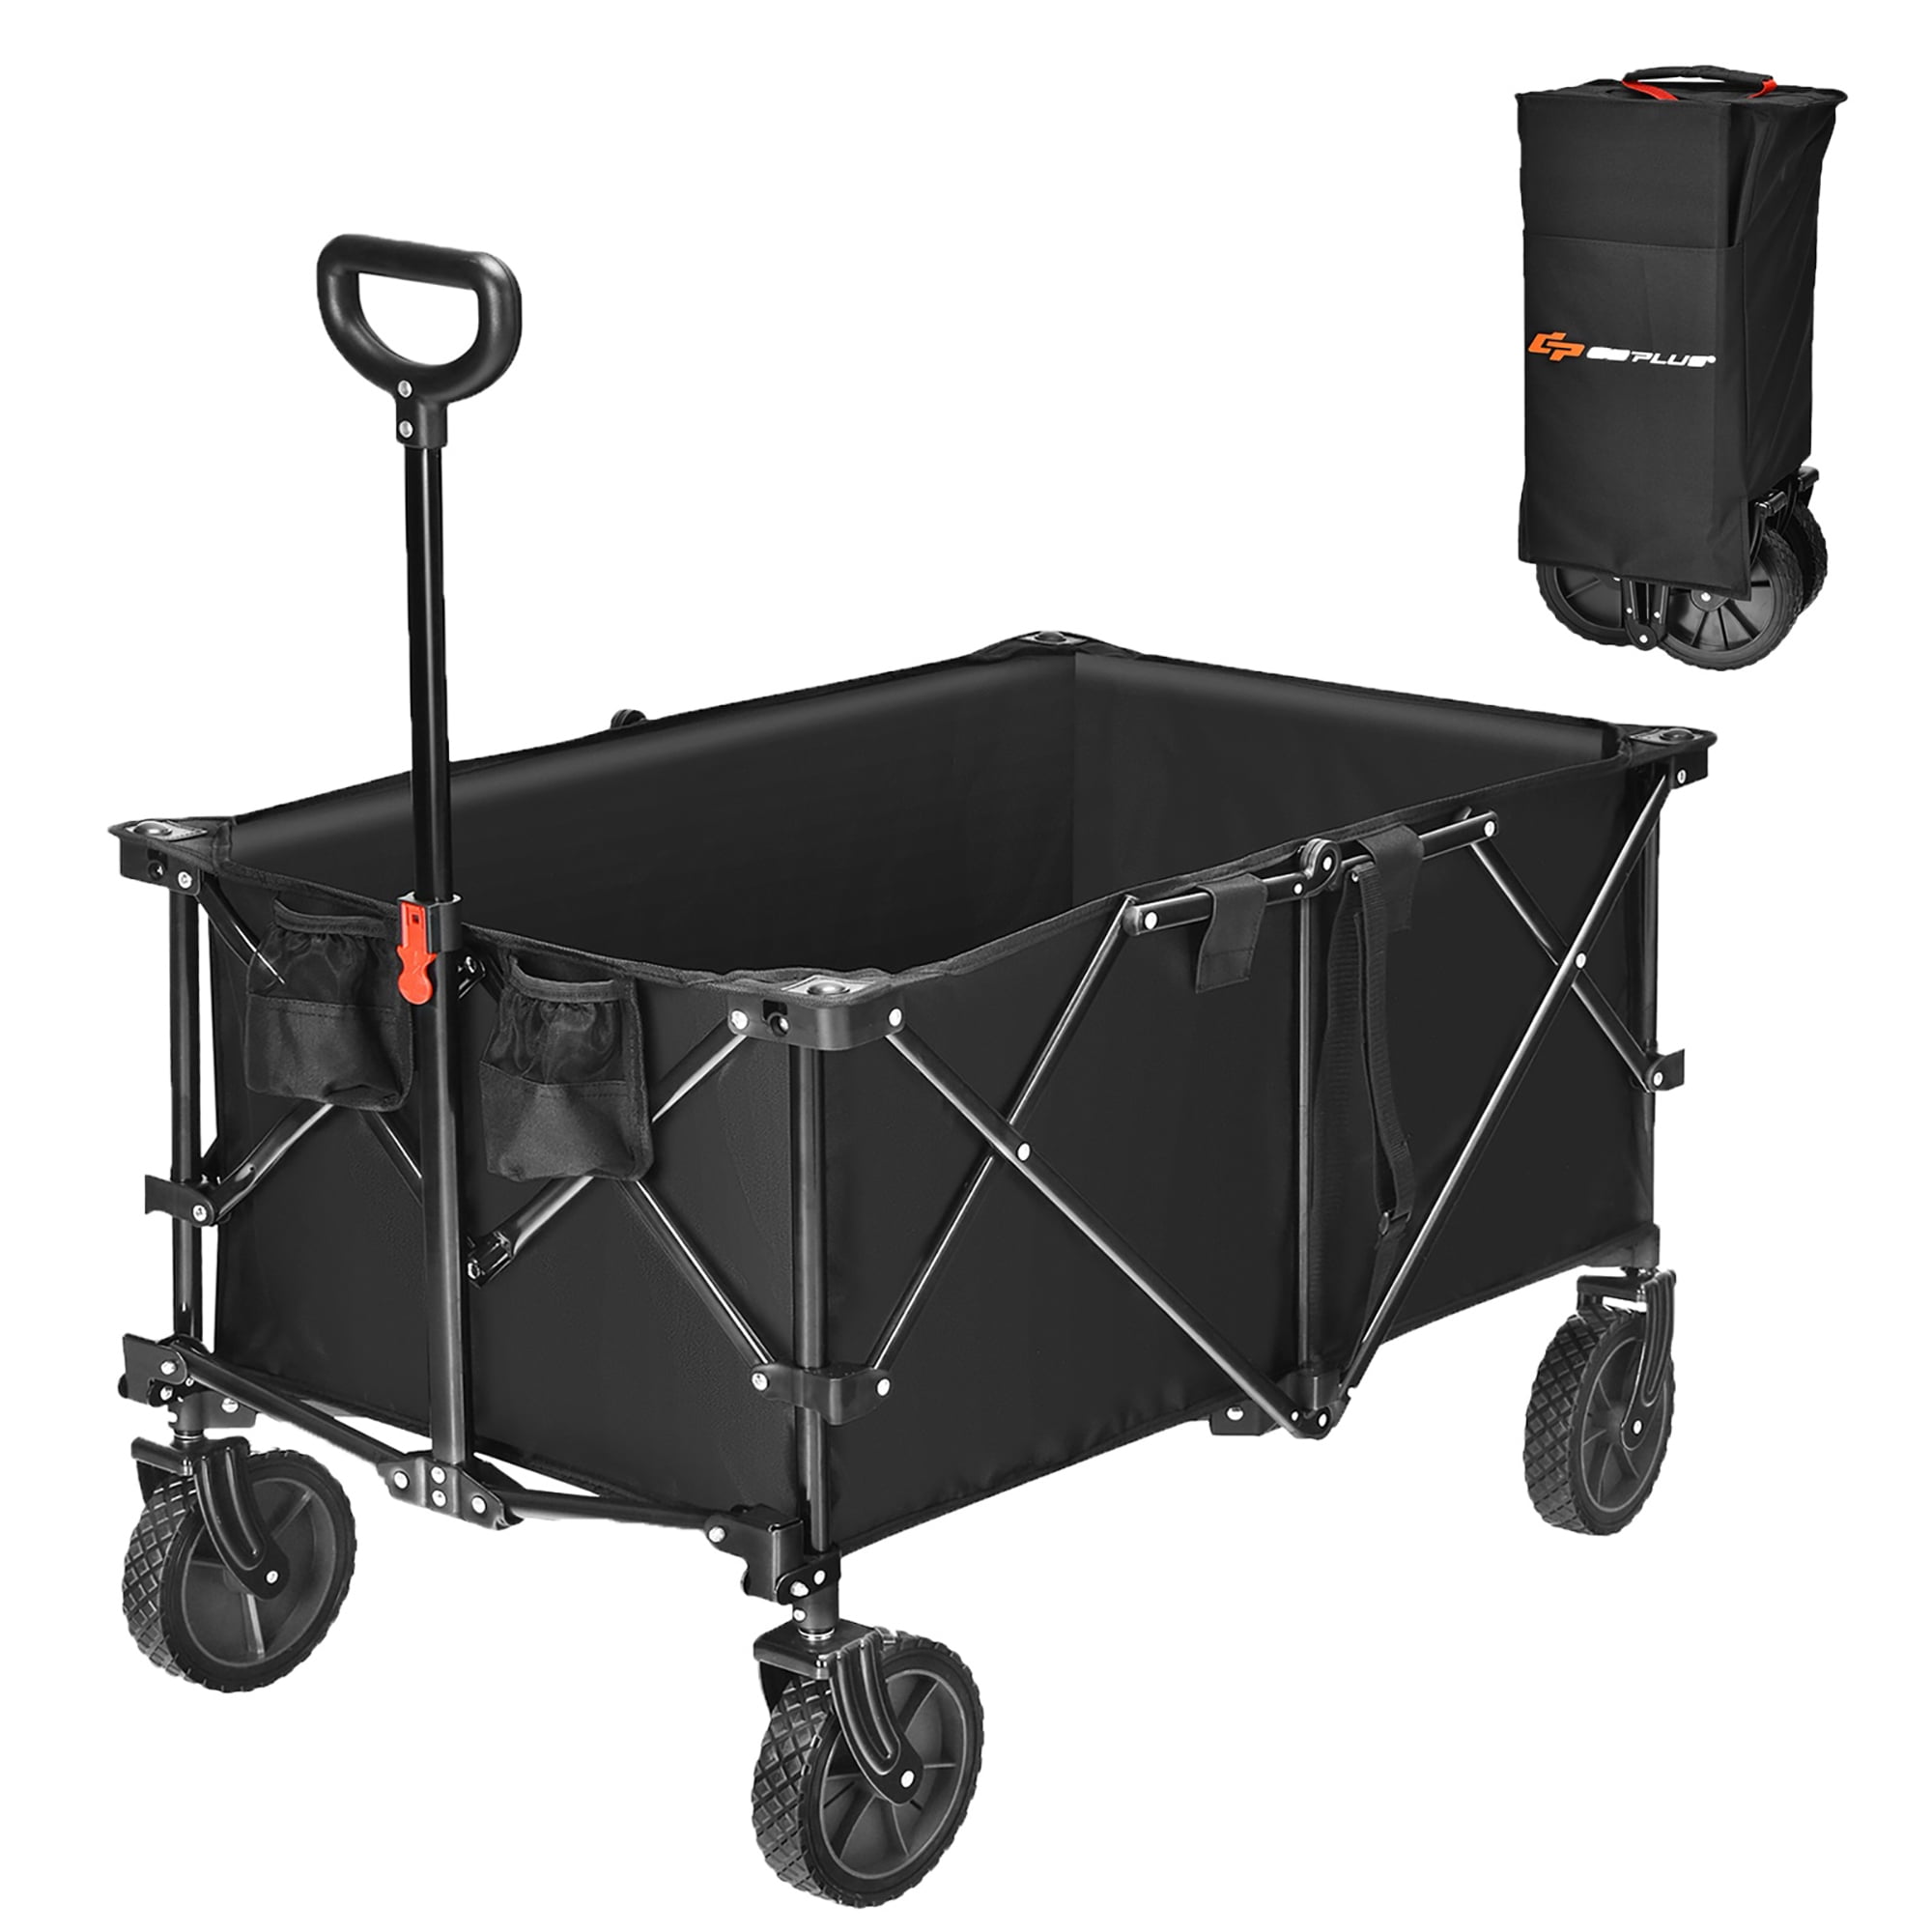 Utility Carts Trolley Outdoor Luggage Trailer Folding Portable Trolley Car Men and Women Pull People Universal Shopping Small Cart Home Climbing Car Gift Color : A, Size : 52.5 * 25 * 102cm